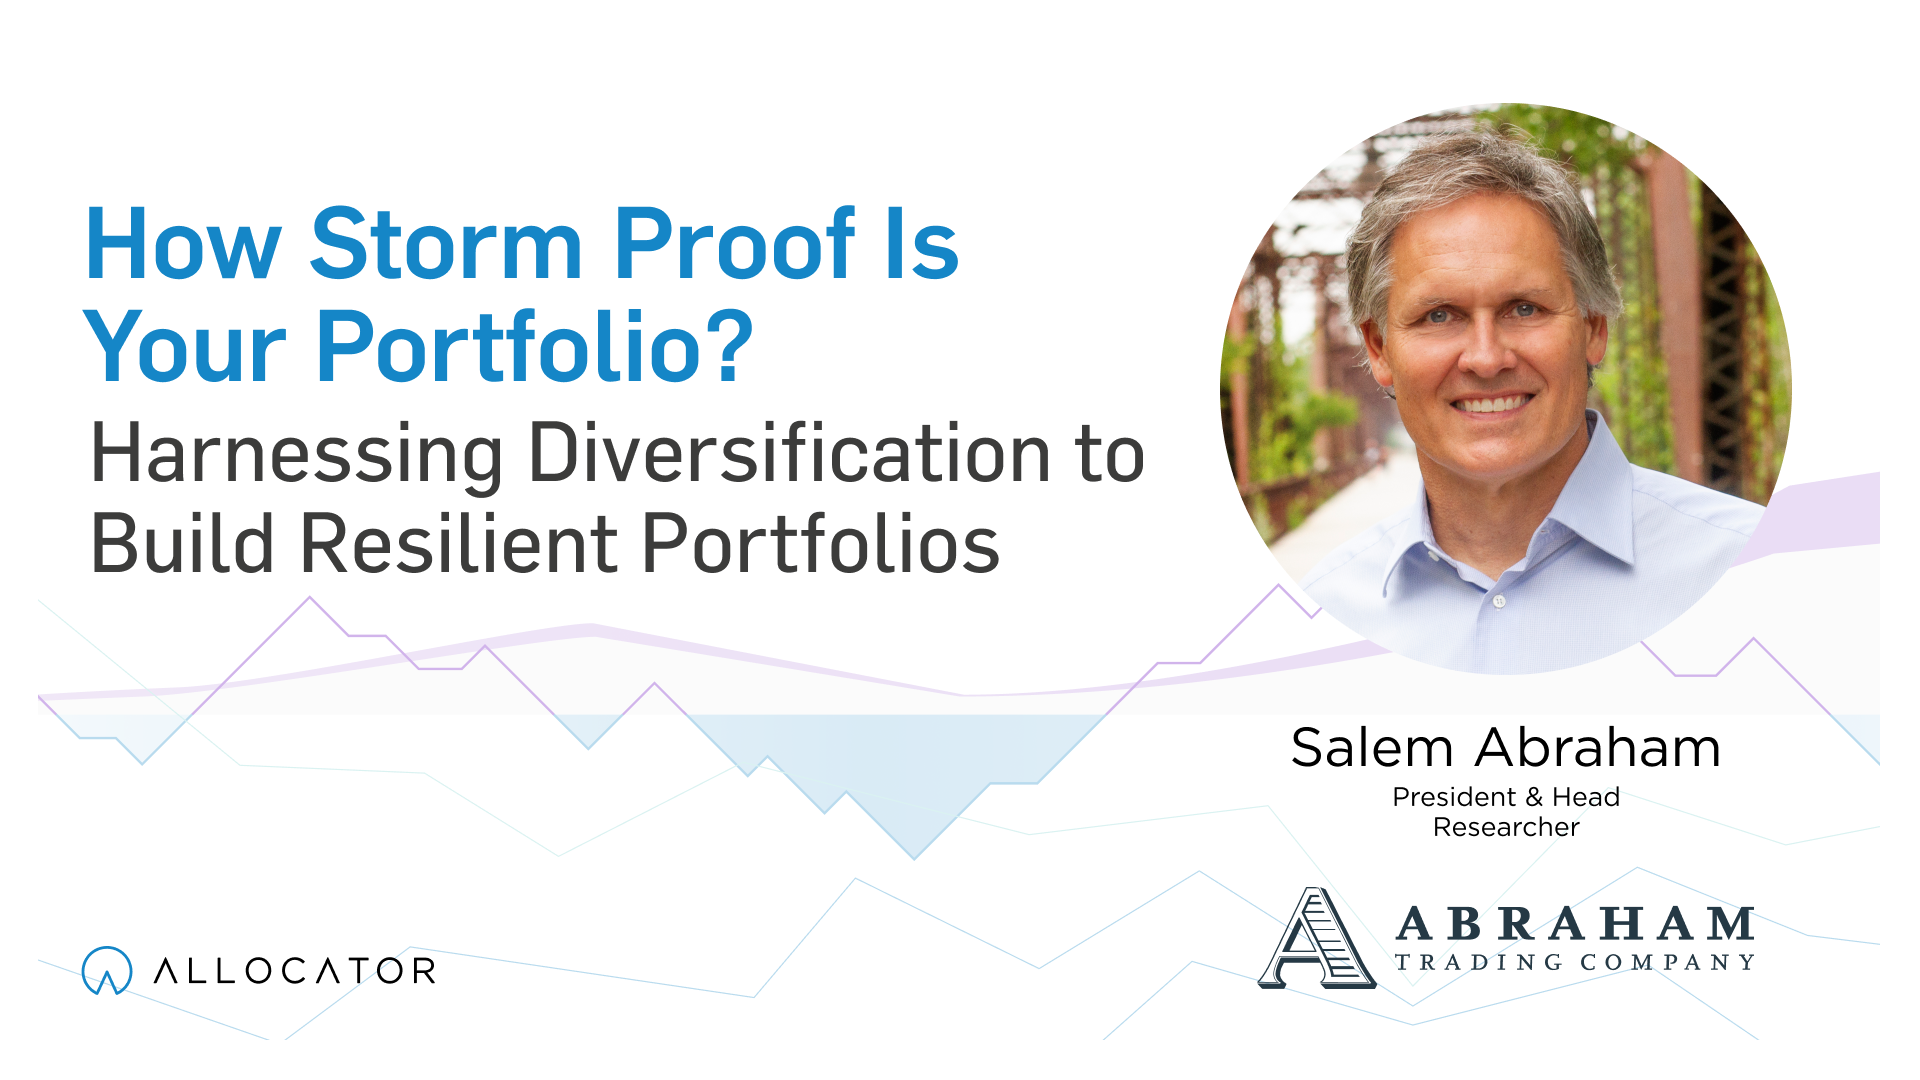 Abraham Trading - How Storm Proof Is Your Portfolio?